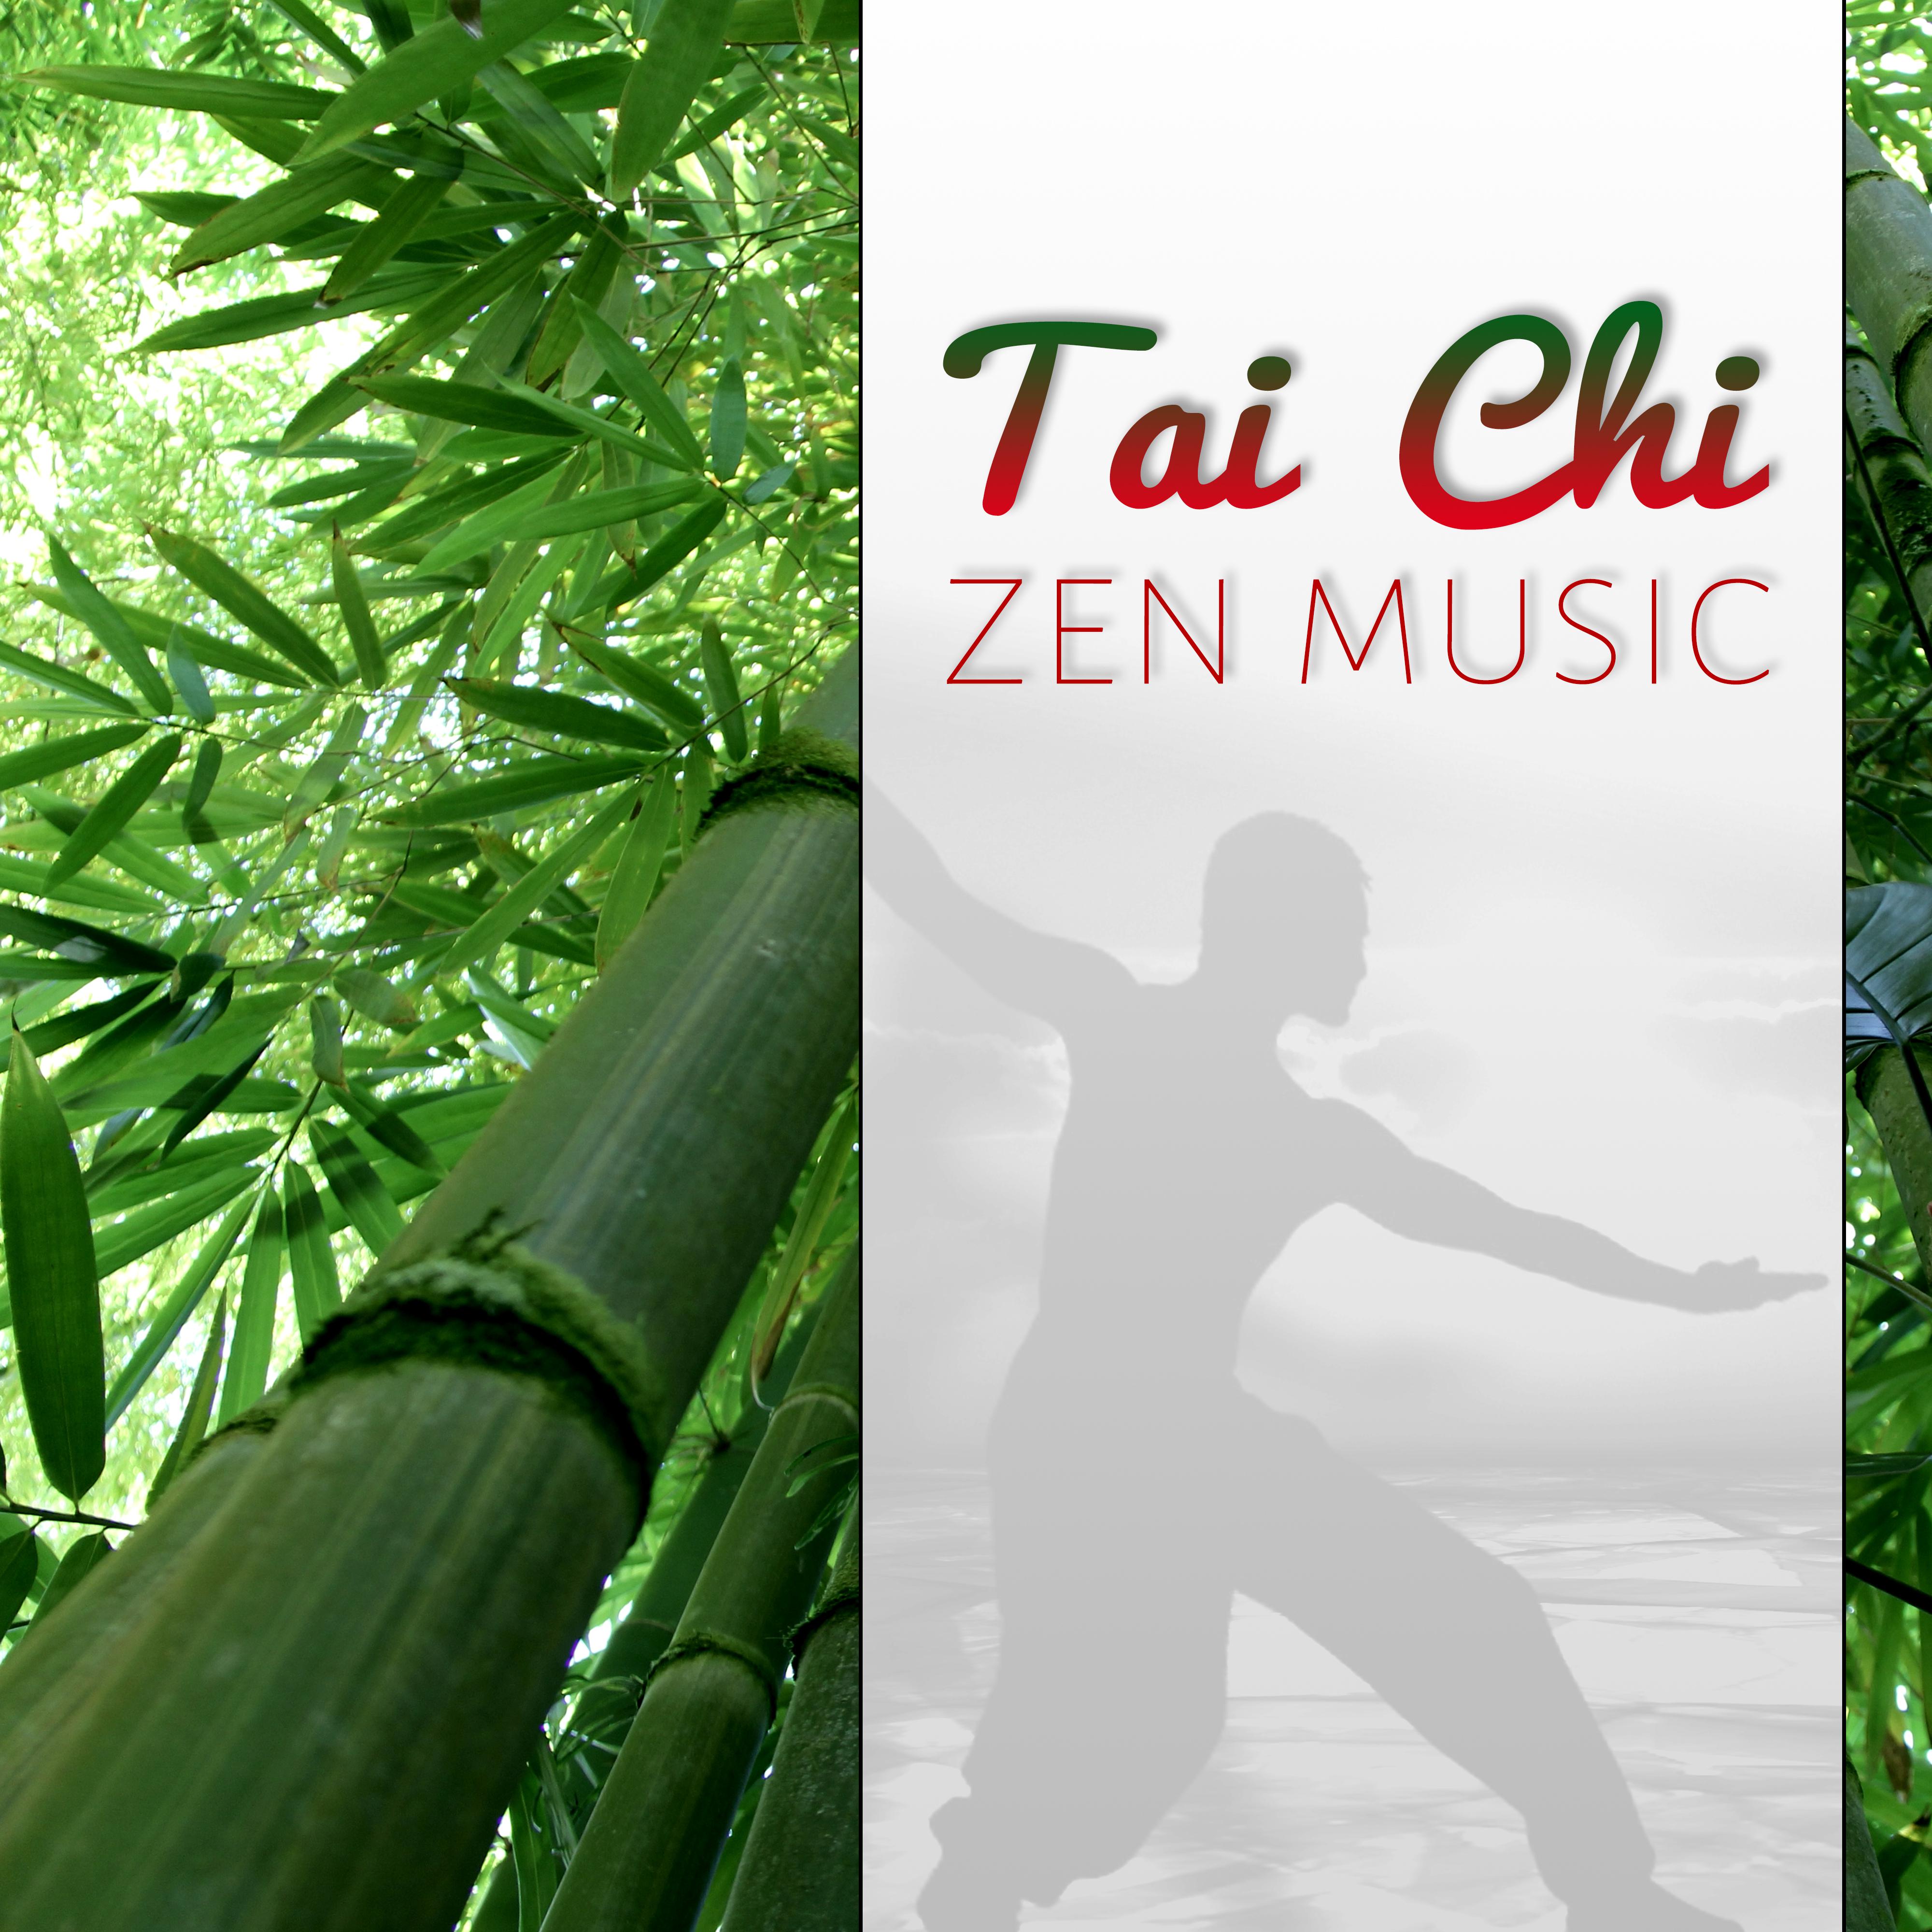 Tai Chi Zen Music  Relaxing Oriental Music with Nature Sounds for Exercises  Mindfulness Meditation Shiatsu Massage, Yoga Relaxation  Stress Management